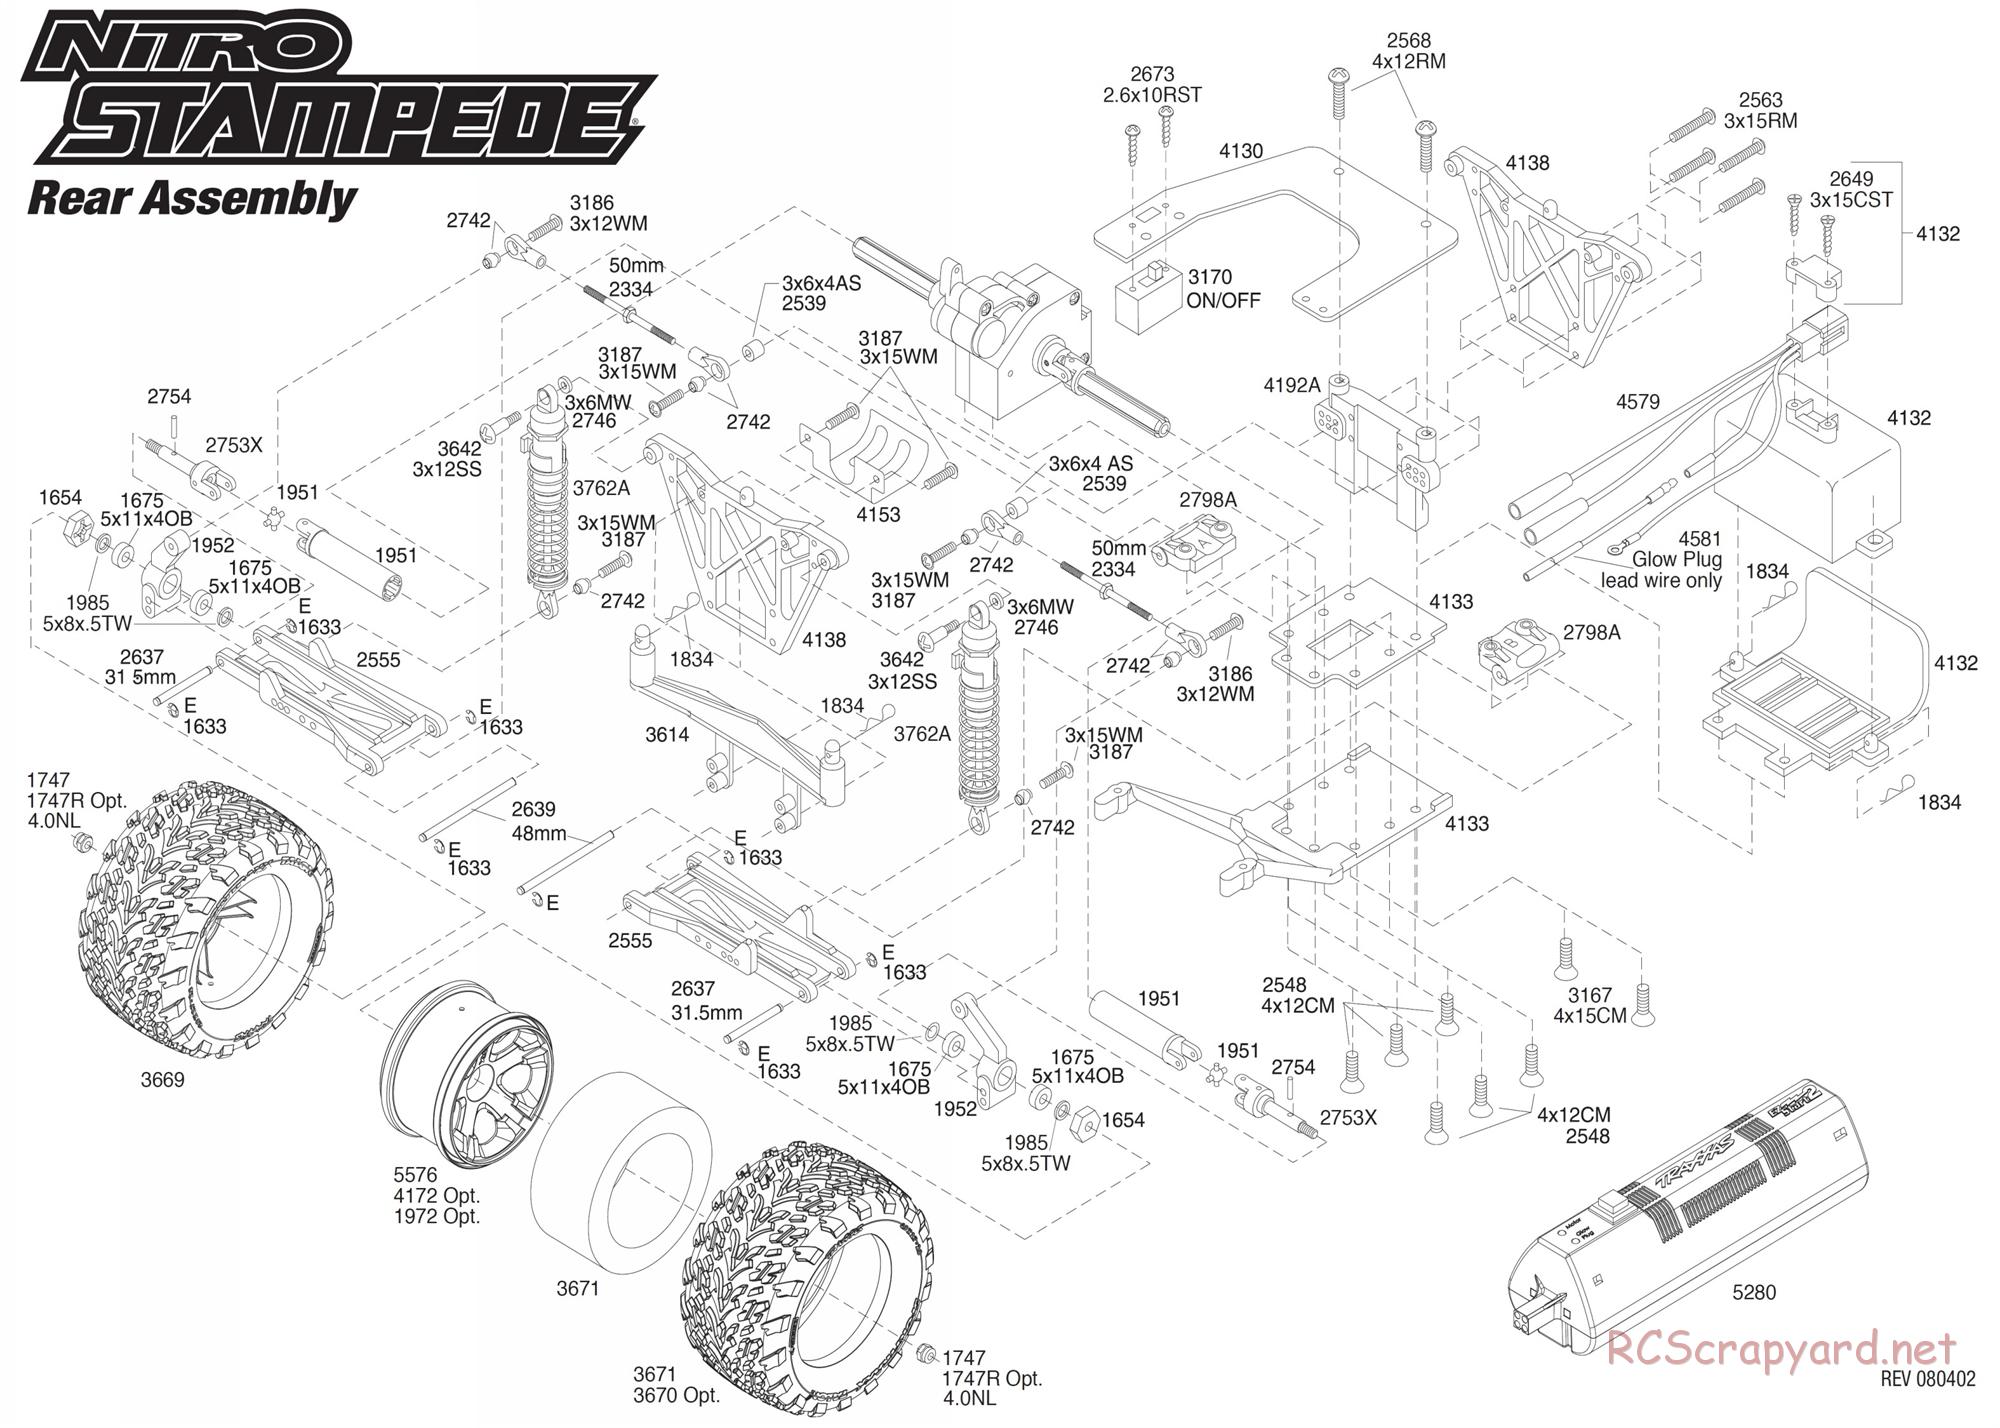 Traxxas - Nitro Stampede (2007) - Exploded Views - Page 3